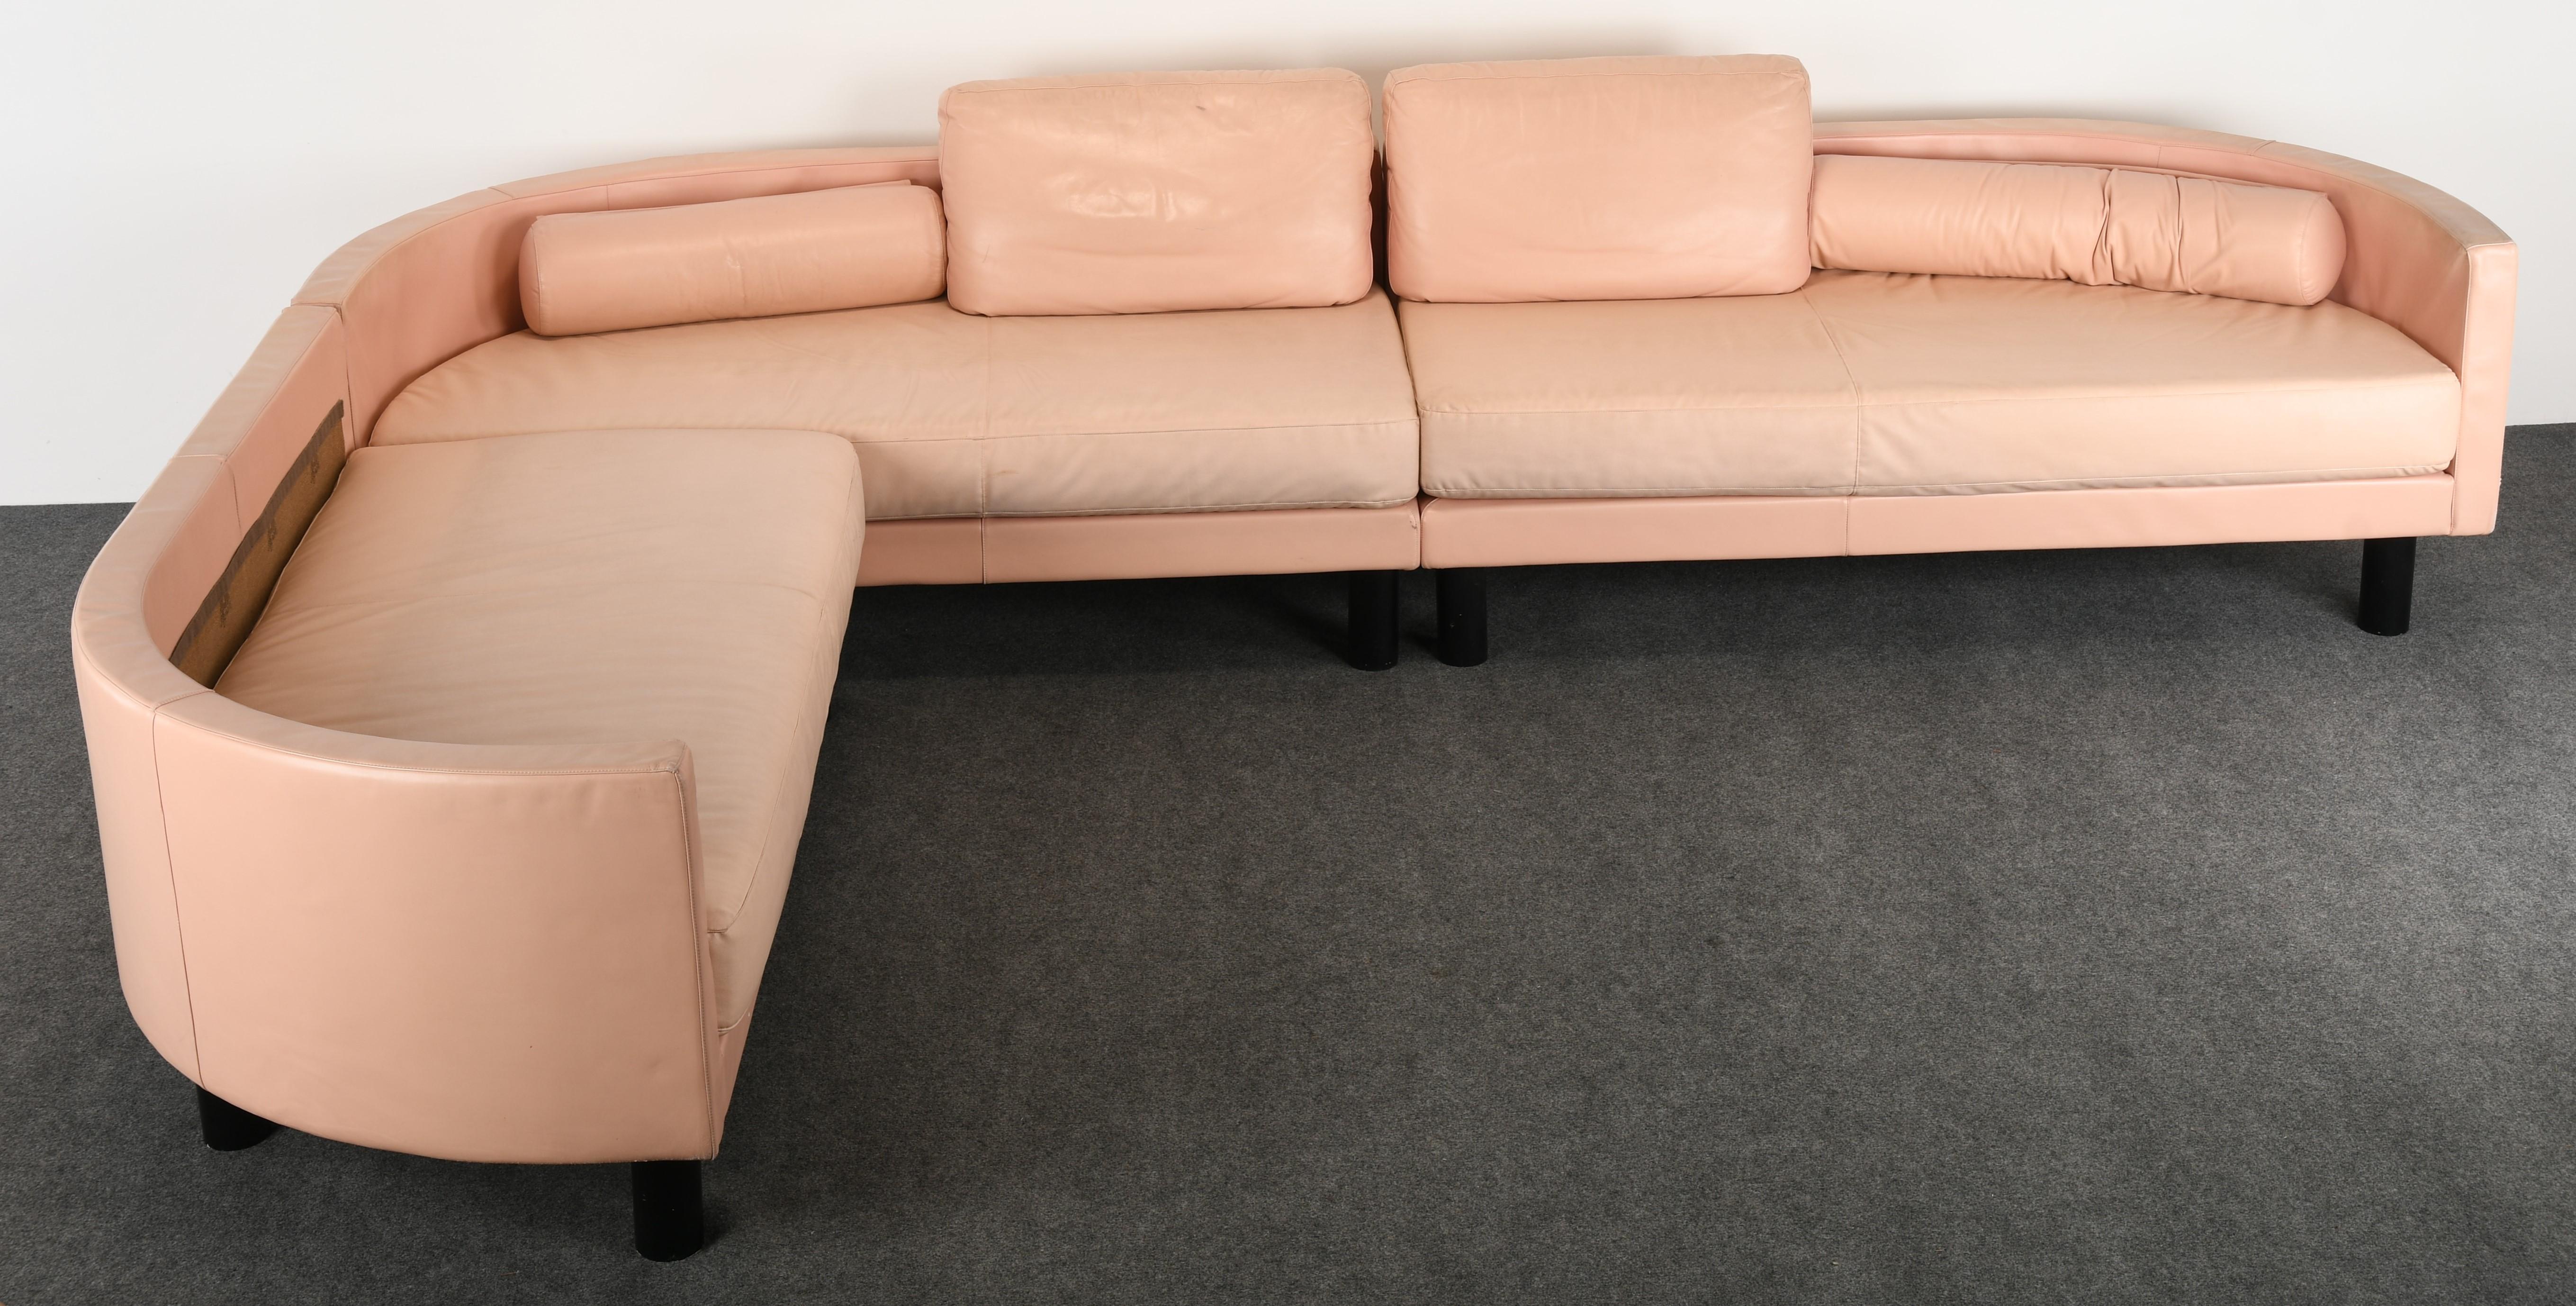 A very unique sectional sofa by Antonietta Ammannati and Giampiero Vitelli. The architect and designers created this innovative design sofa in 1988. The elegant sofa is missing some pillows but the structure is there to reupholster in your favorite